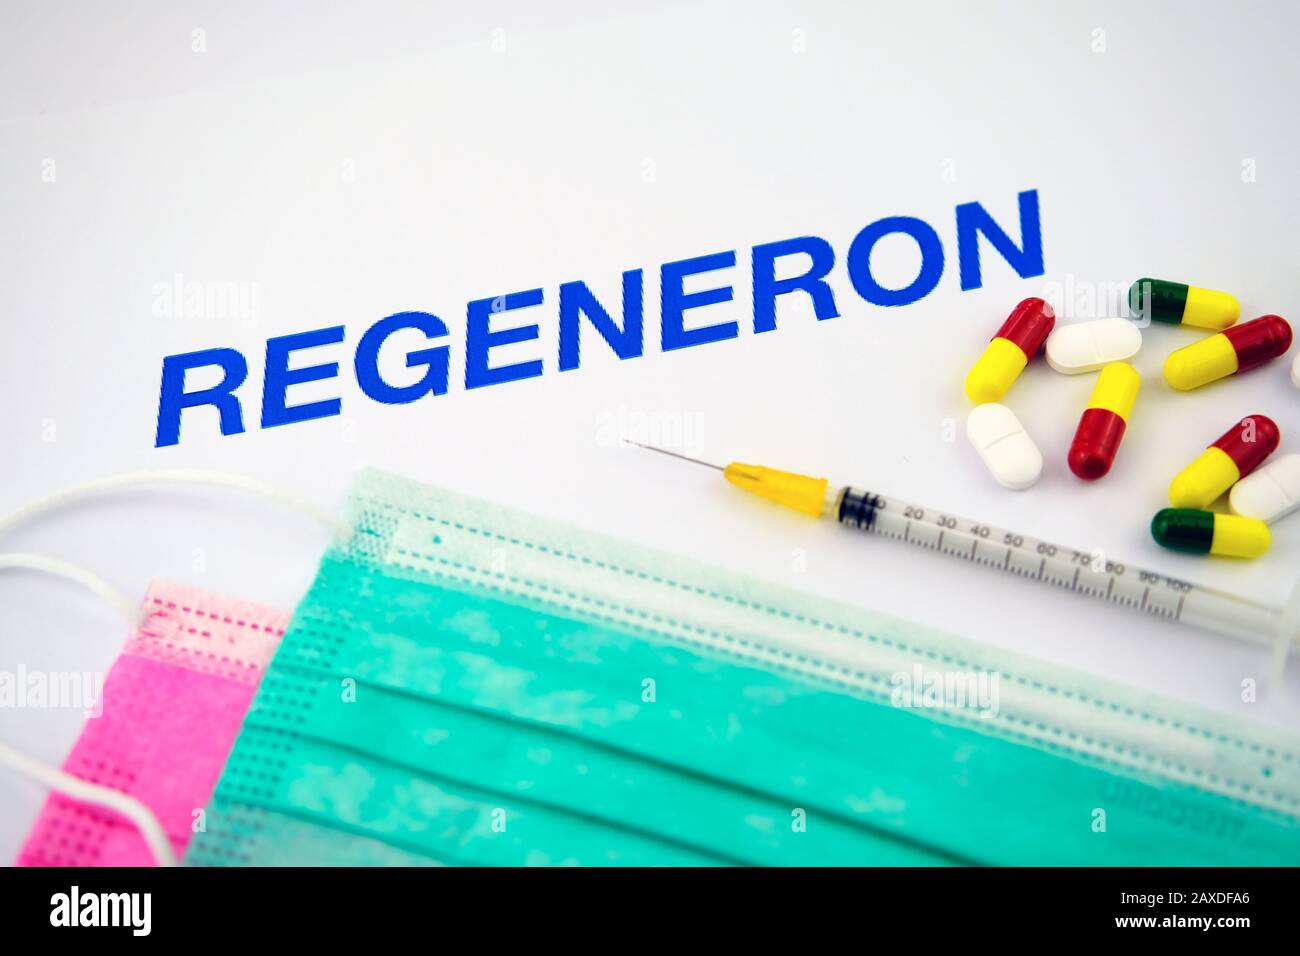 Regeneron is a leading biotechnology company using the power of science to bring new medicines to patients in need. Concept photo Stock Photo